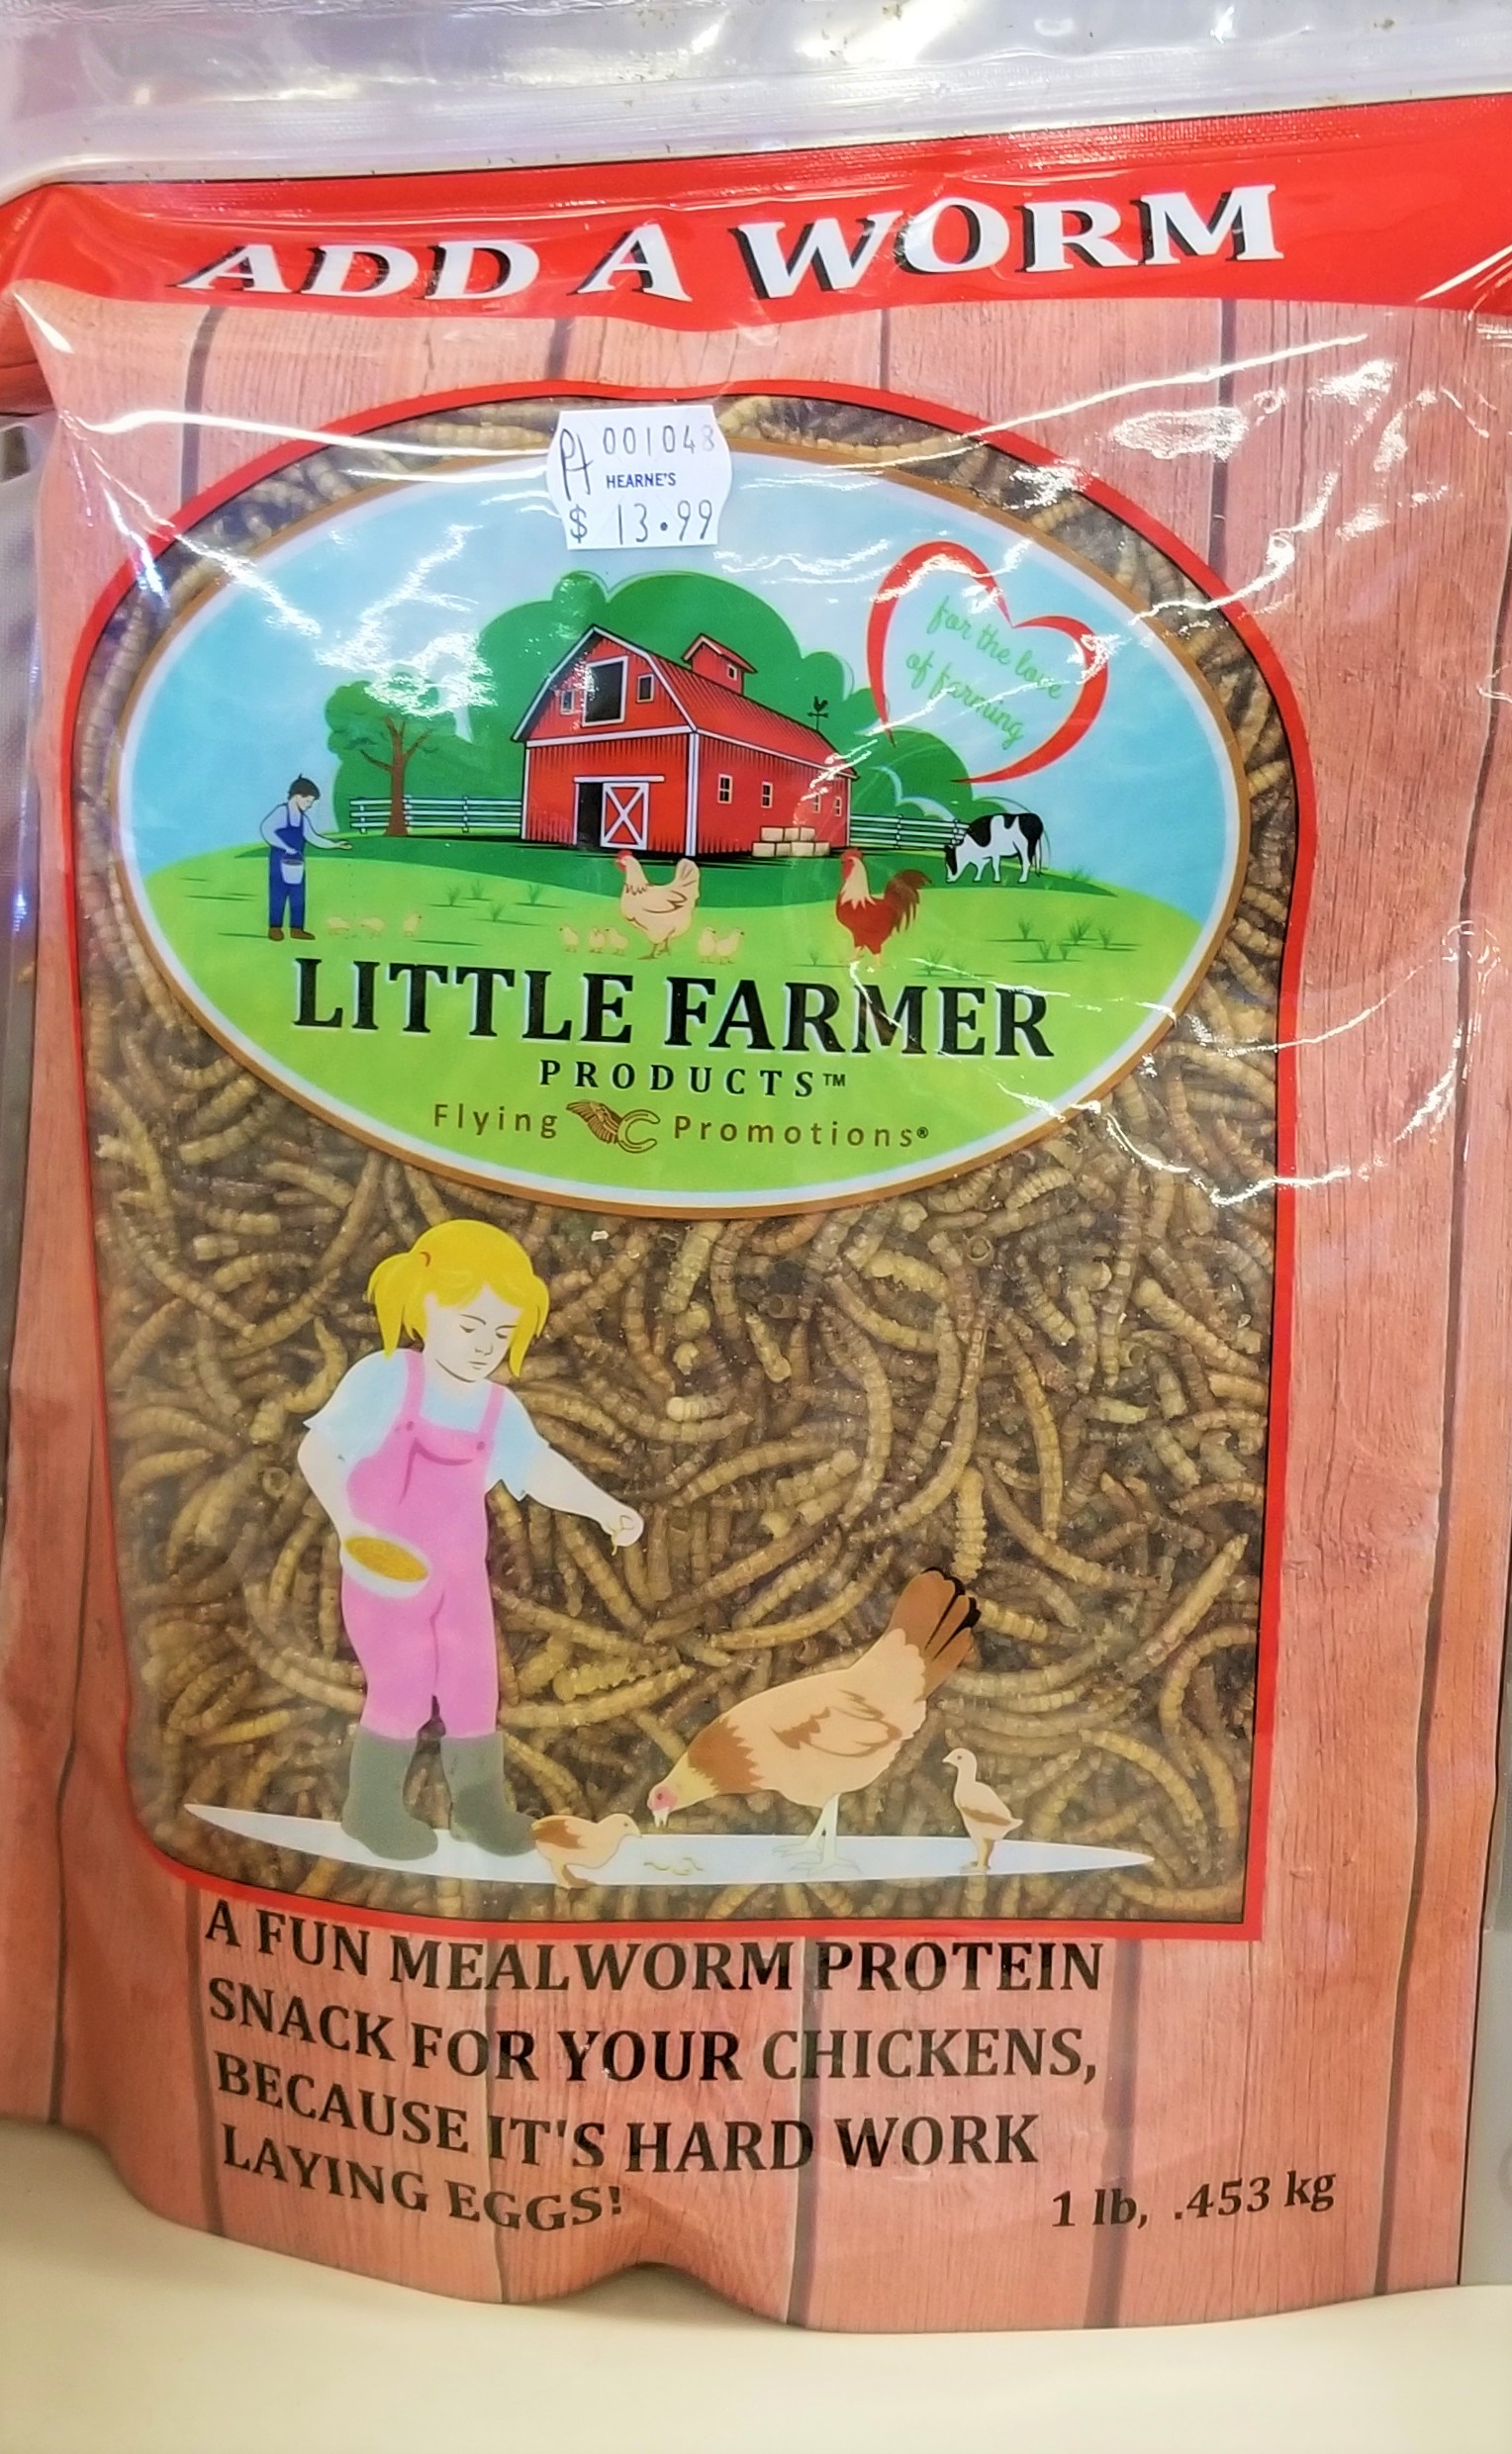 add-a-worm-iittle-farmer-products-meal-worms-pt001048-13.99.jpg